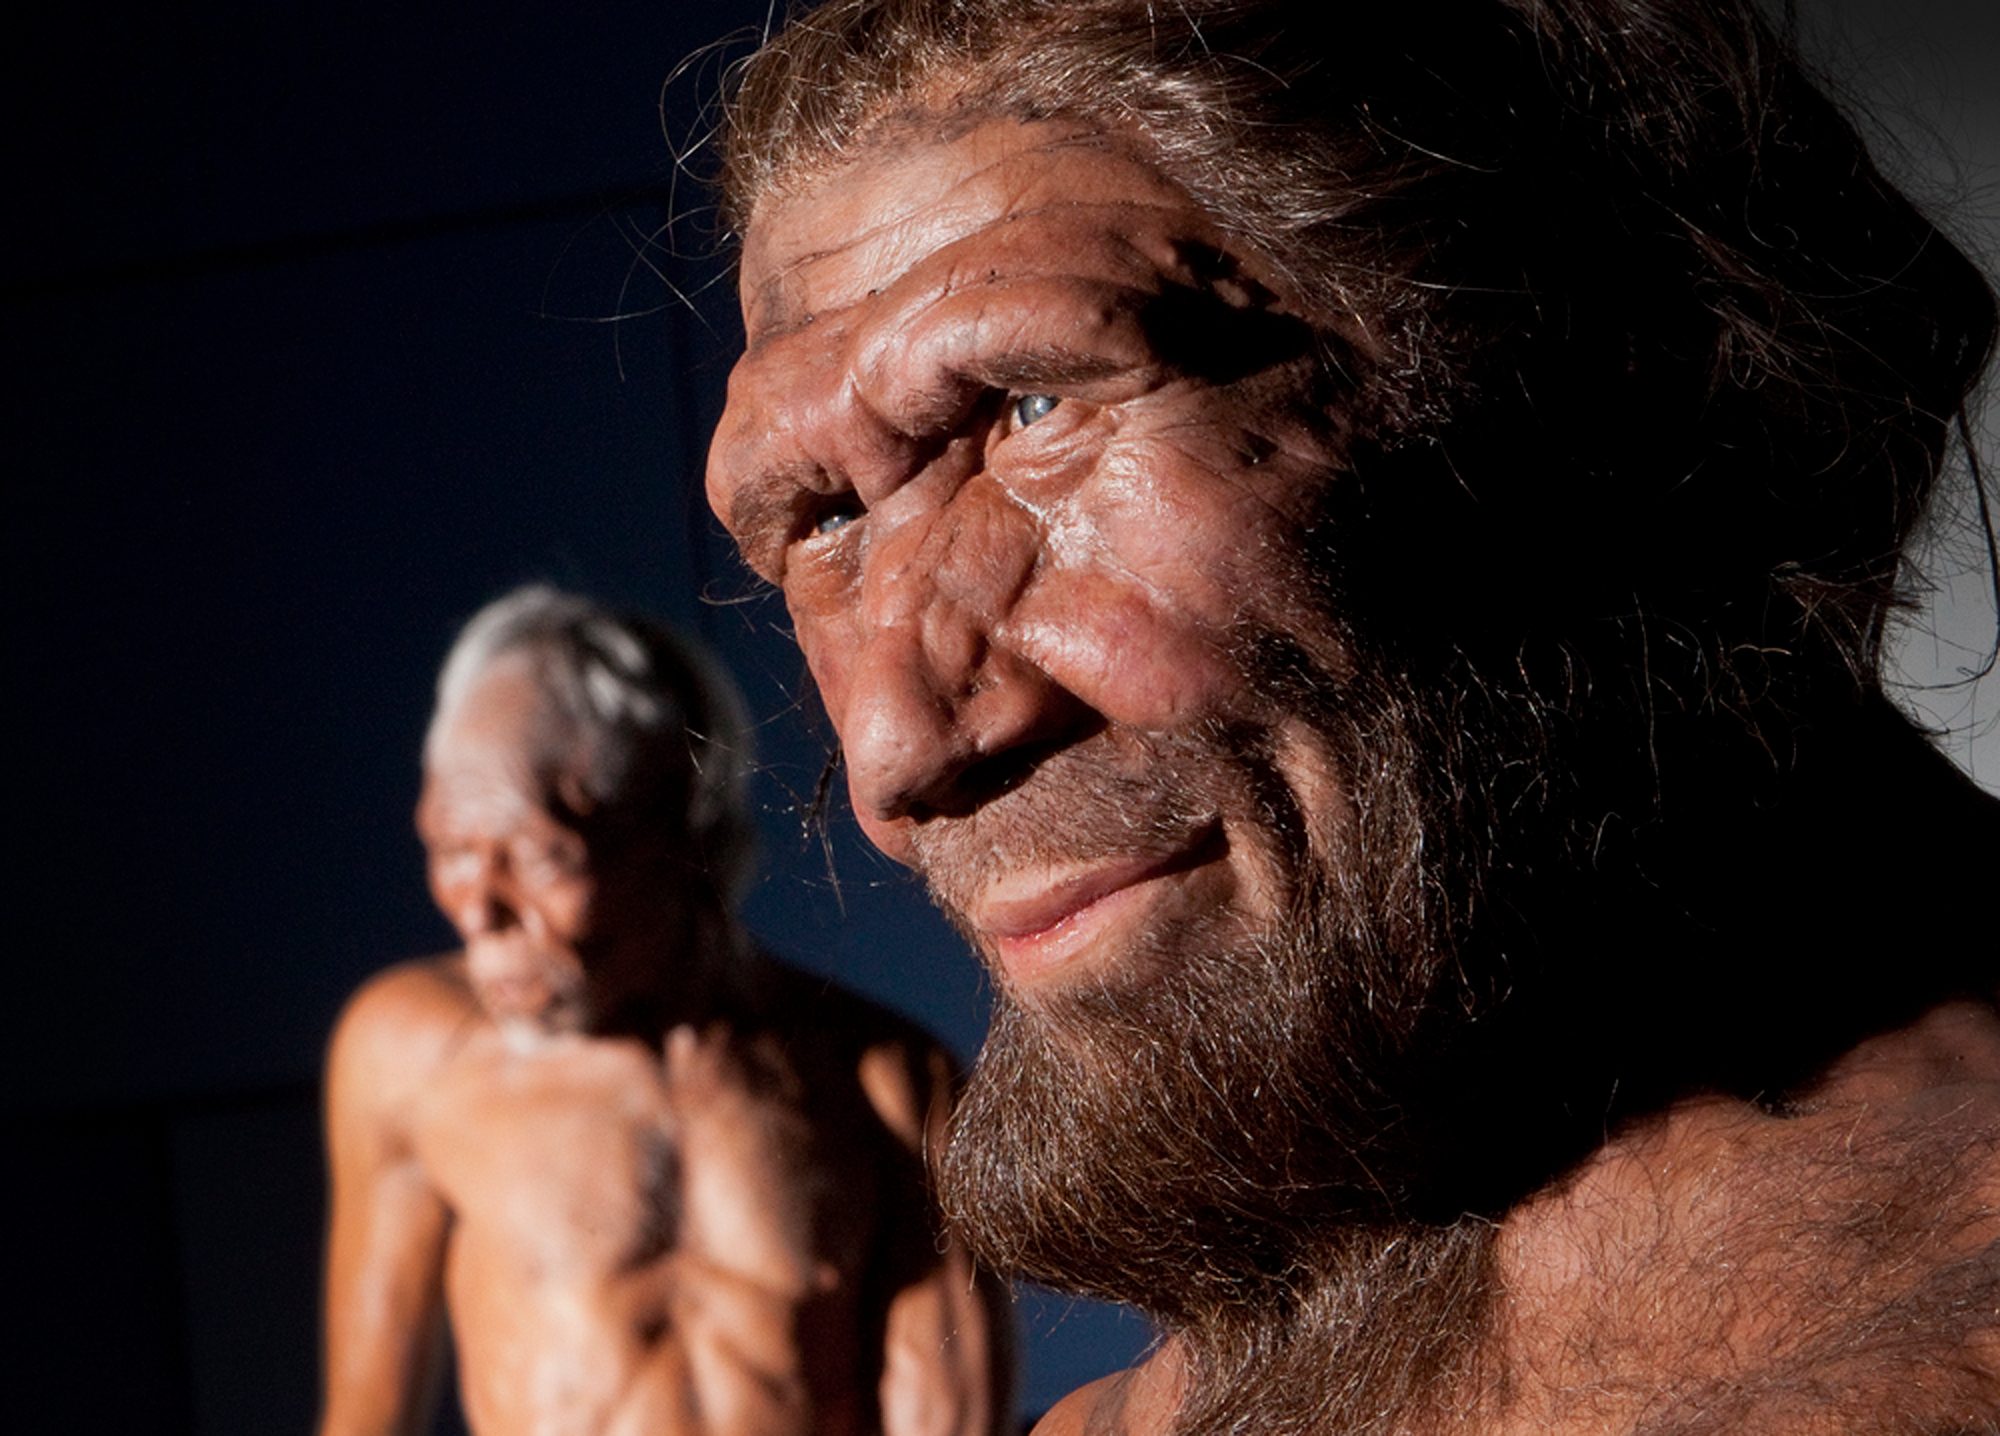 Neanderthals 'overlapped' with modern humans for up to 5,400 years